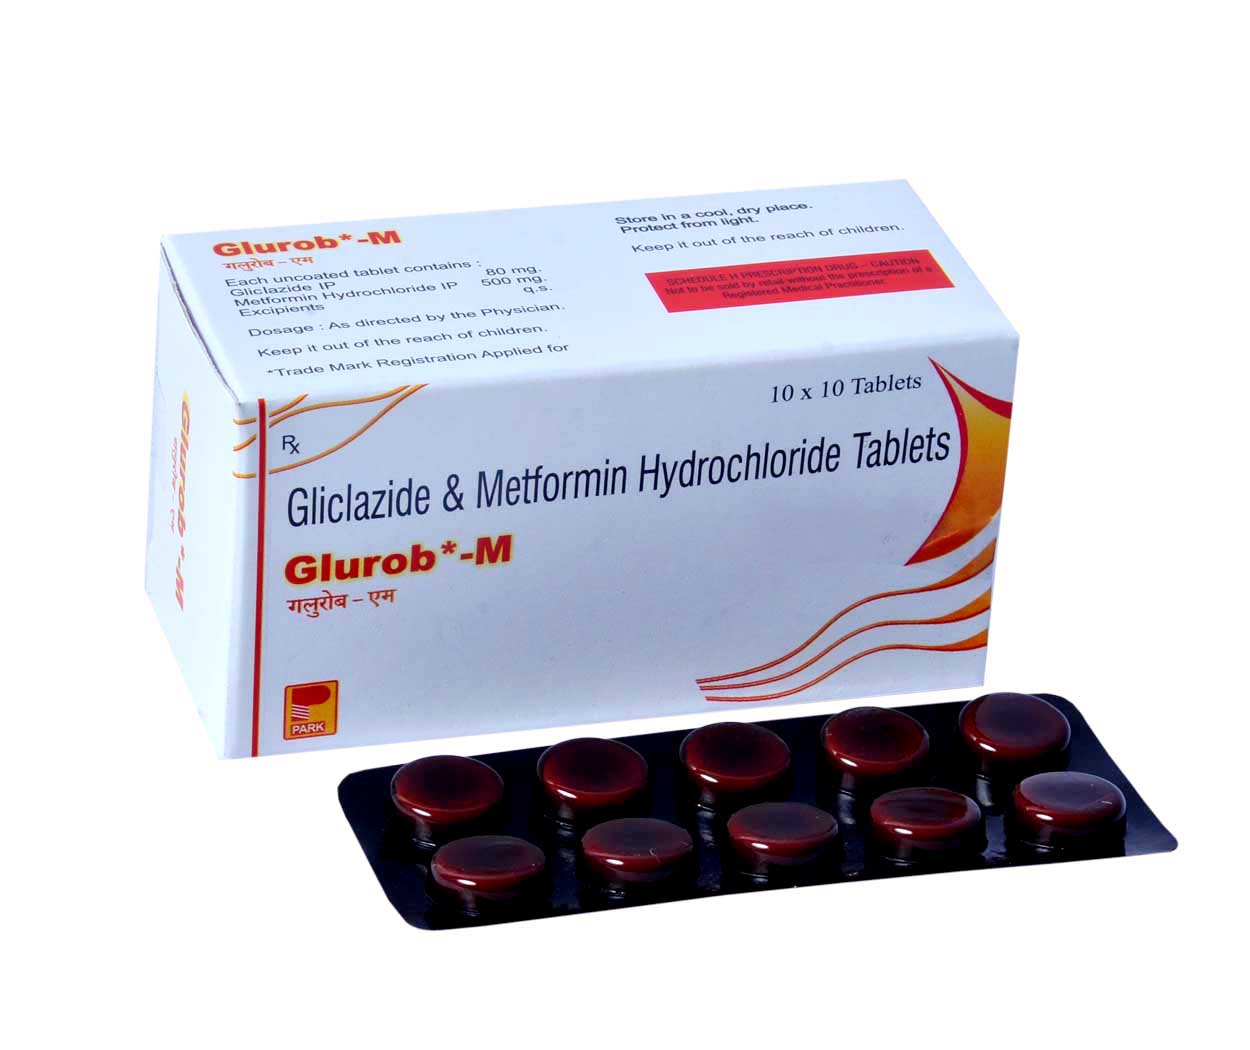 Product Name: Glurob M, Compositions of Glurob M are Gliclazide & Metformin Hydrochloride Tablets - Park Pharmaceuticals